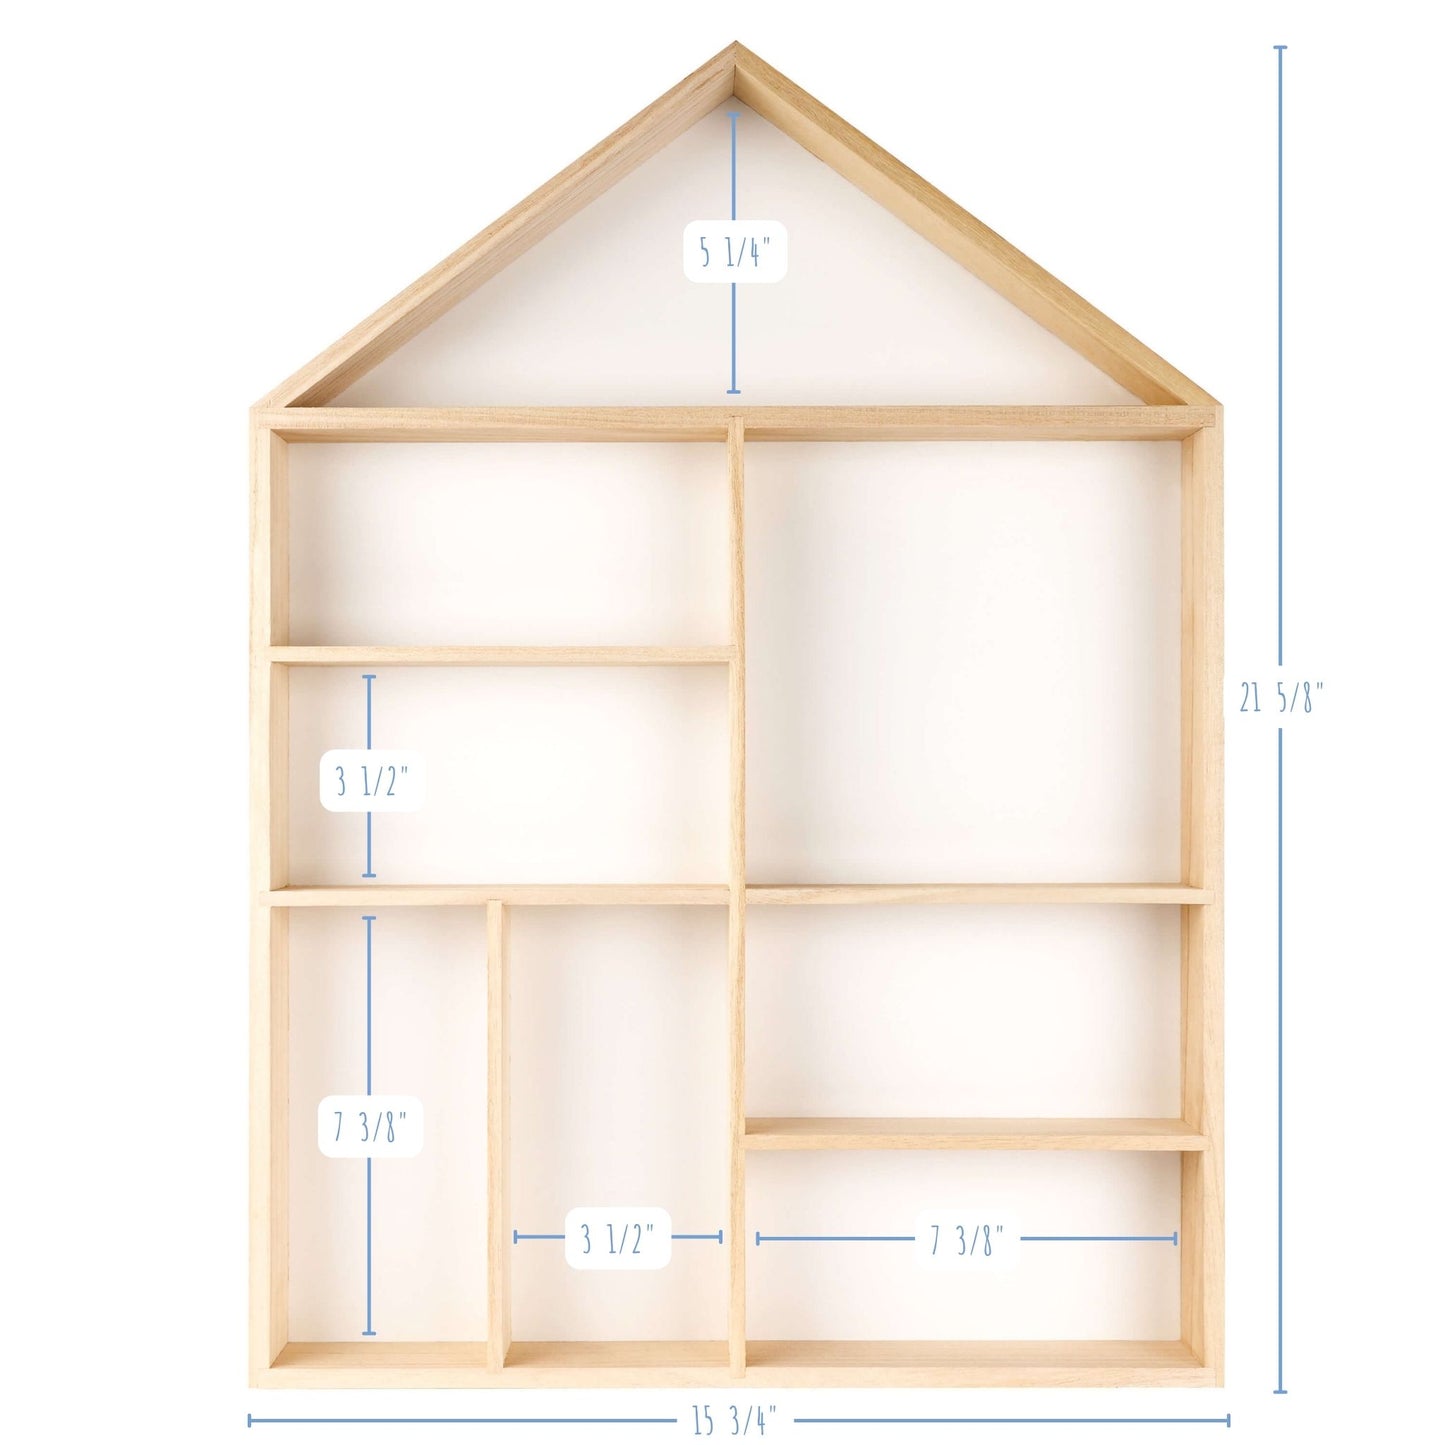 House shaped wooden toy display shelf with a white-colored backboard - with compartments size detailed (front view)